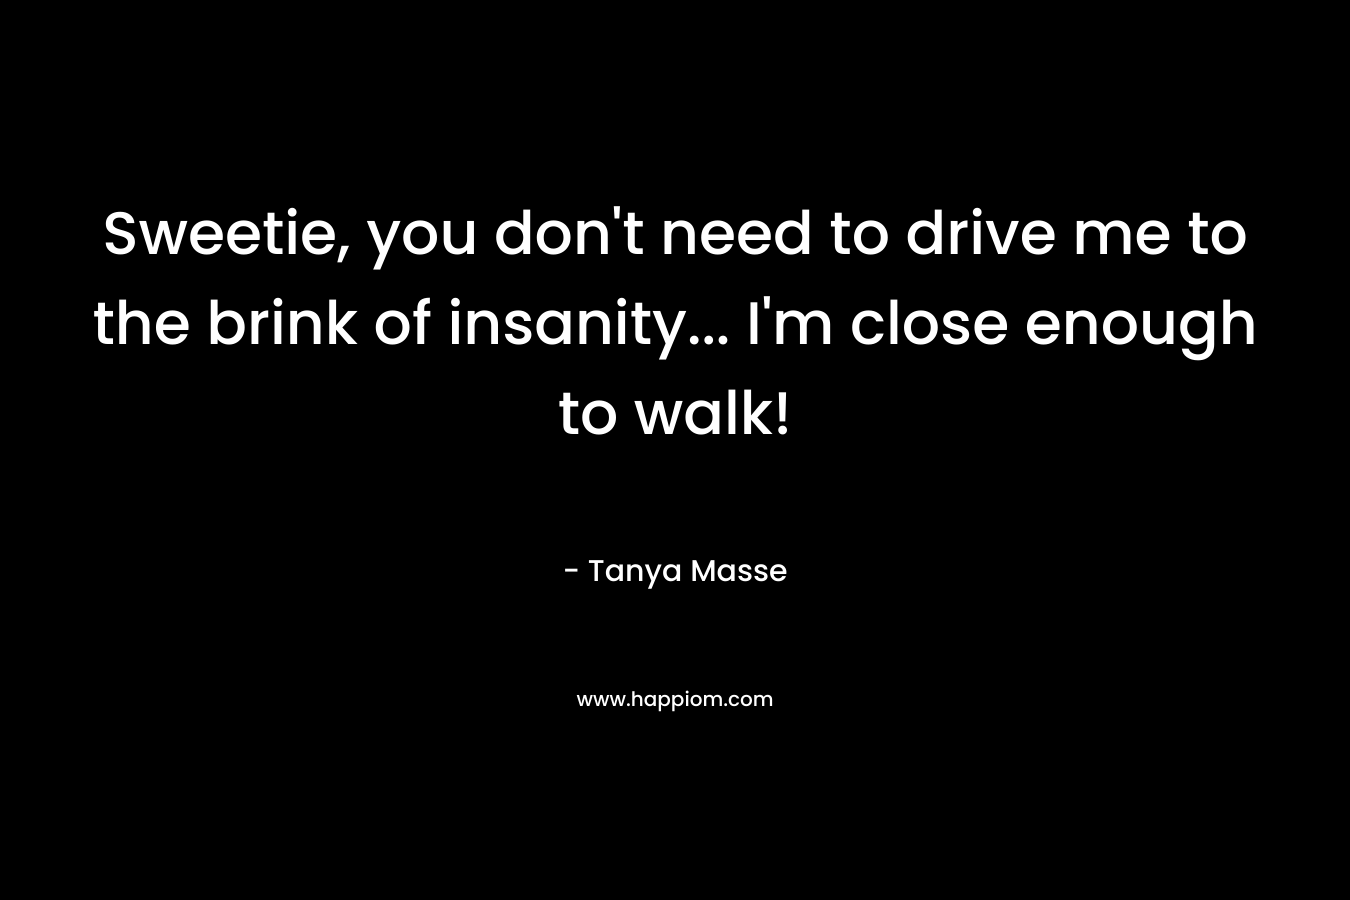 Sweetie, you don’t need to drive me to the brink of insanity… I’m close enough to walk! – Tanya Masse